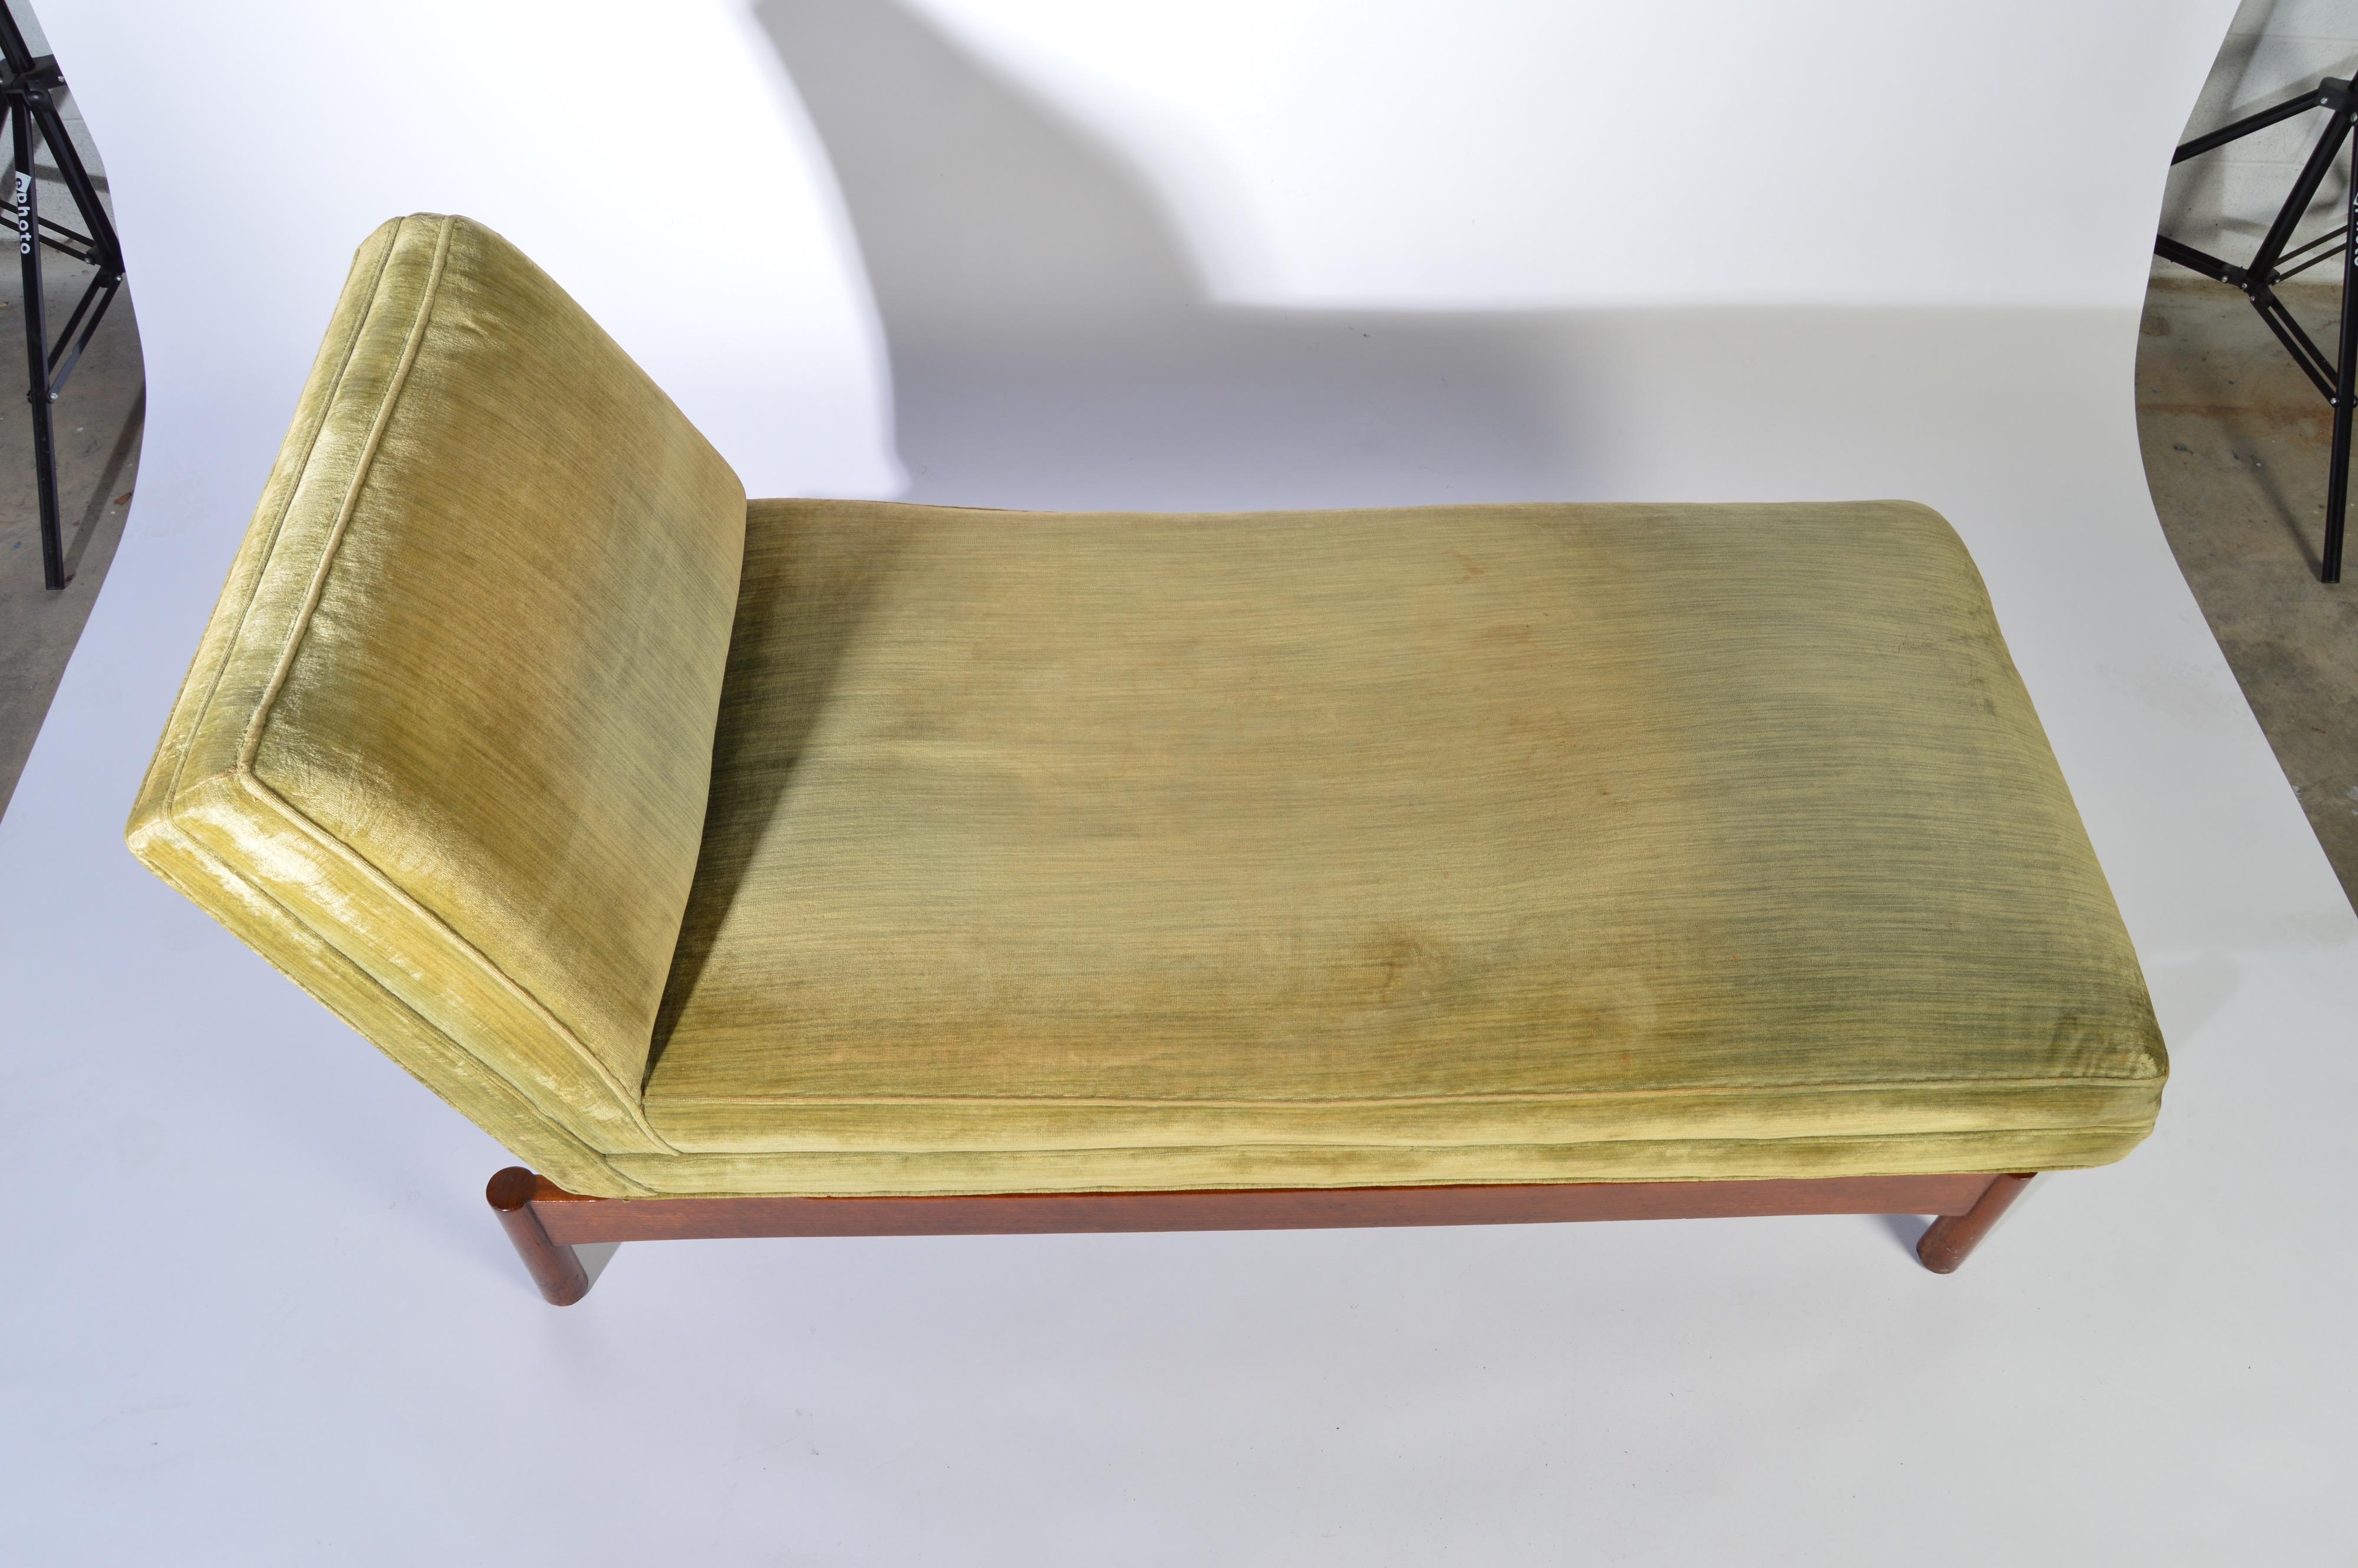 An incredibly rare original chaise lounge chair designed and built by Gerald Luss for Lehigh Furniture Company having walnut frame and original velvet upholstery.
Created circa 1950.
Solid construction, wonderful Latina to the original velvet and